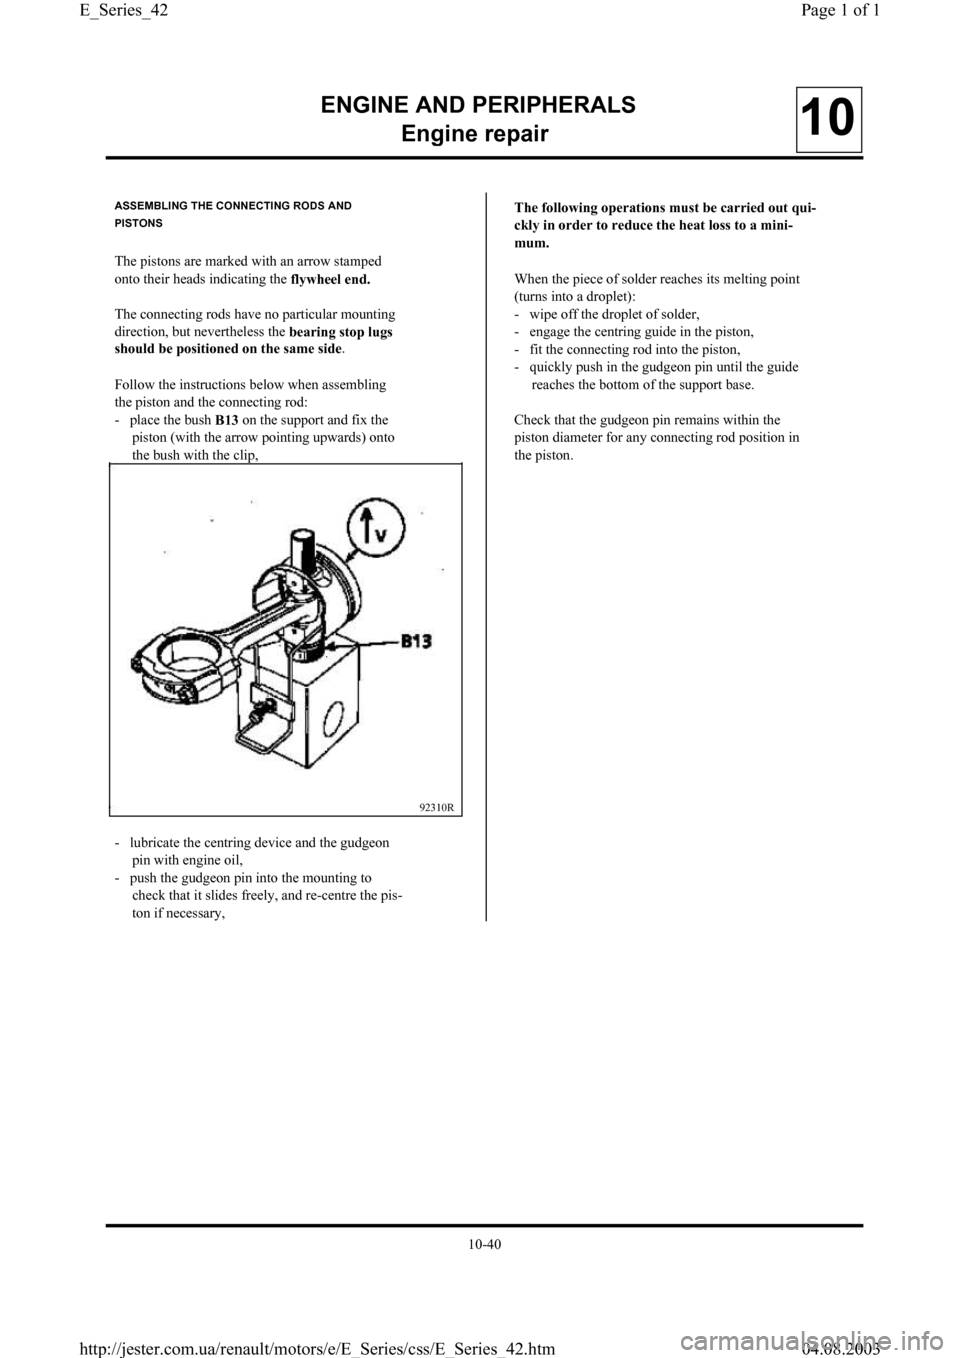 RENAULT CLIO 1997 X57 / 1.G Petrol Engines Service Manual ENGINE AND PERIPHERALS
En
gine repair10
ASSEMBLING THE CONNECTING RODS AND
PISTONS
The pistons are marked with an arrow stamped
onto their heads indicating the 
flywheel end.
The connecting rods have 